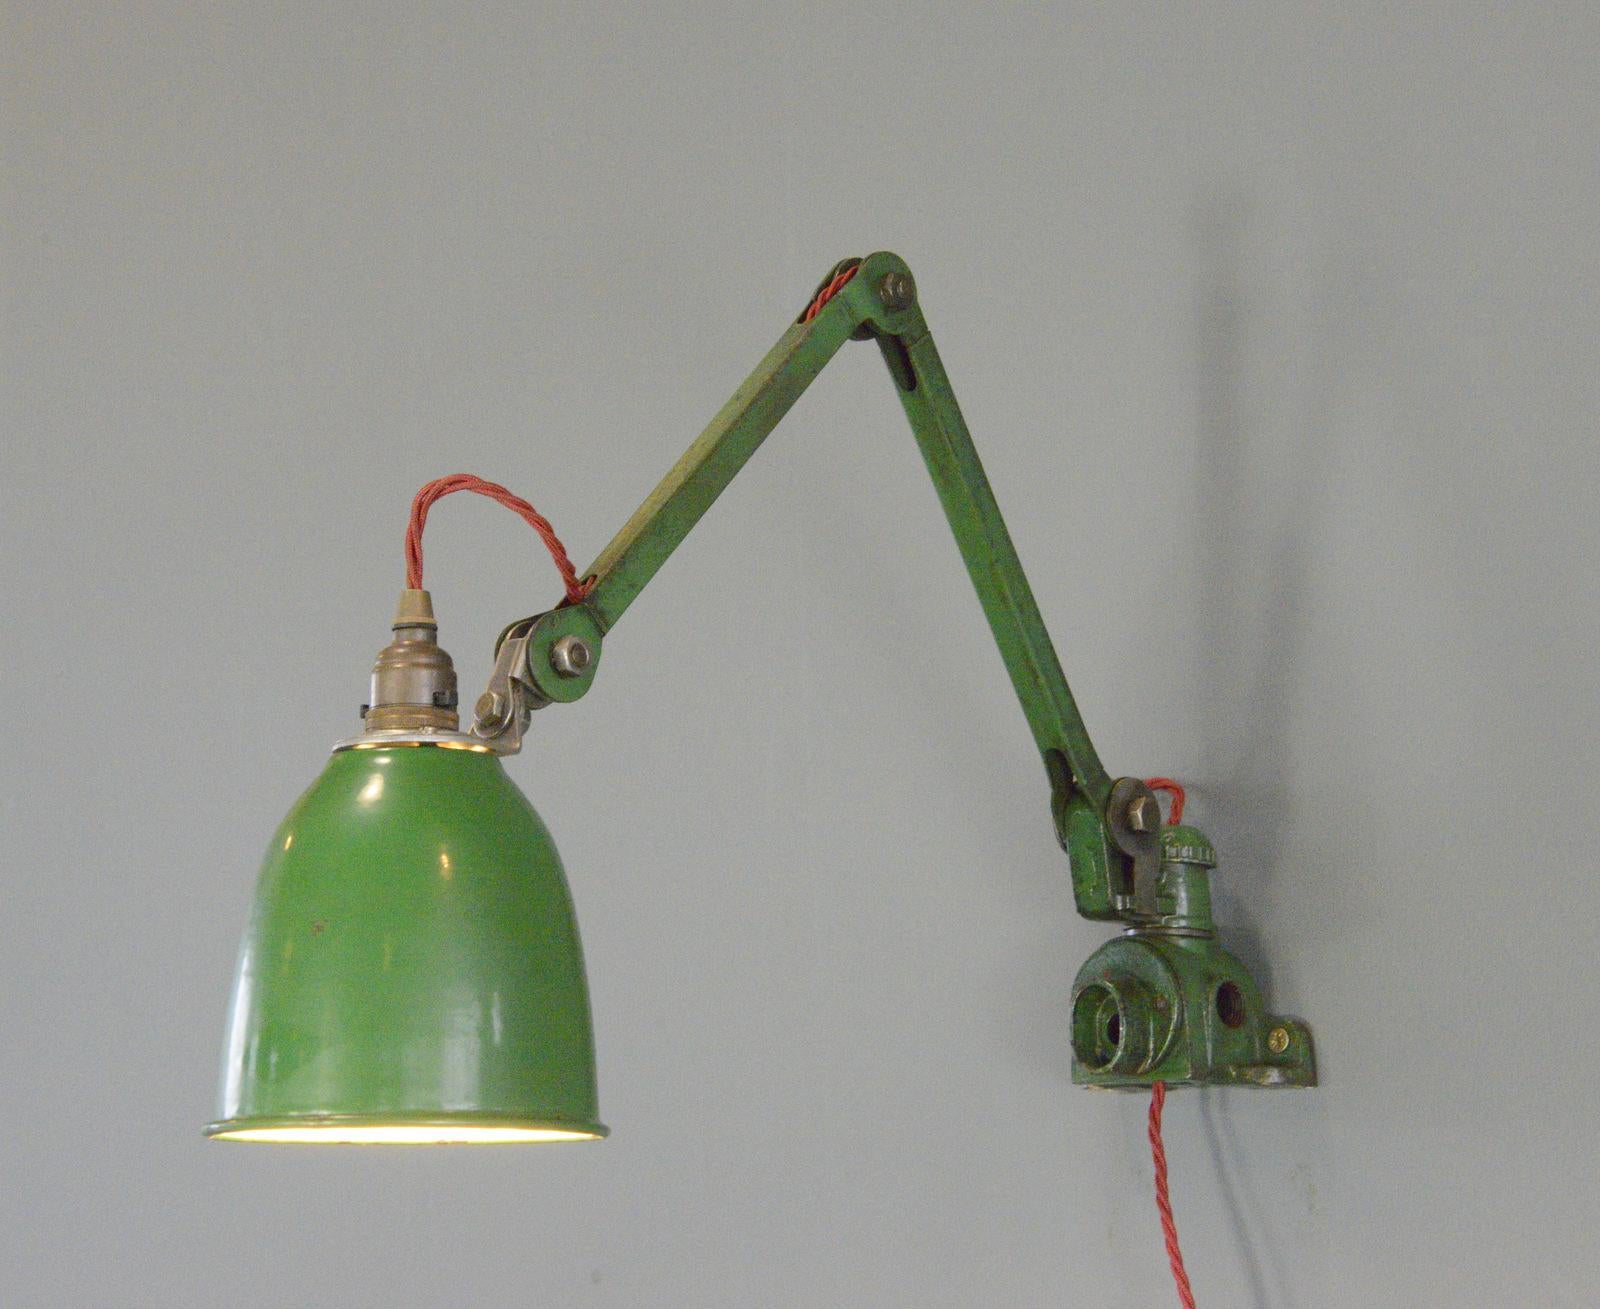 Wall Mounted Task Lamp By EDL Circa 1930s

- Vitreous green enamel shade
- Articulated arms and shade
- Takes B22 fitting bulbs
- On/Off switch on the shade
- Made by EDL, Stafford
- English ~ 1930s
- 15cm wide 
- Extends up to 125cm from the